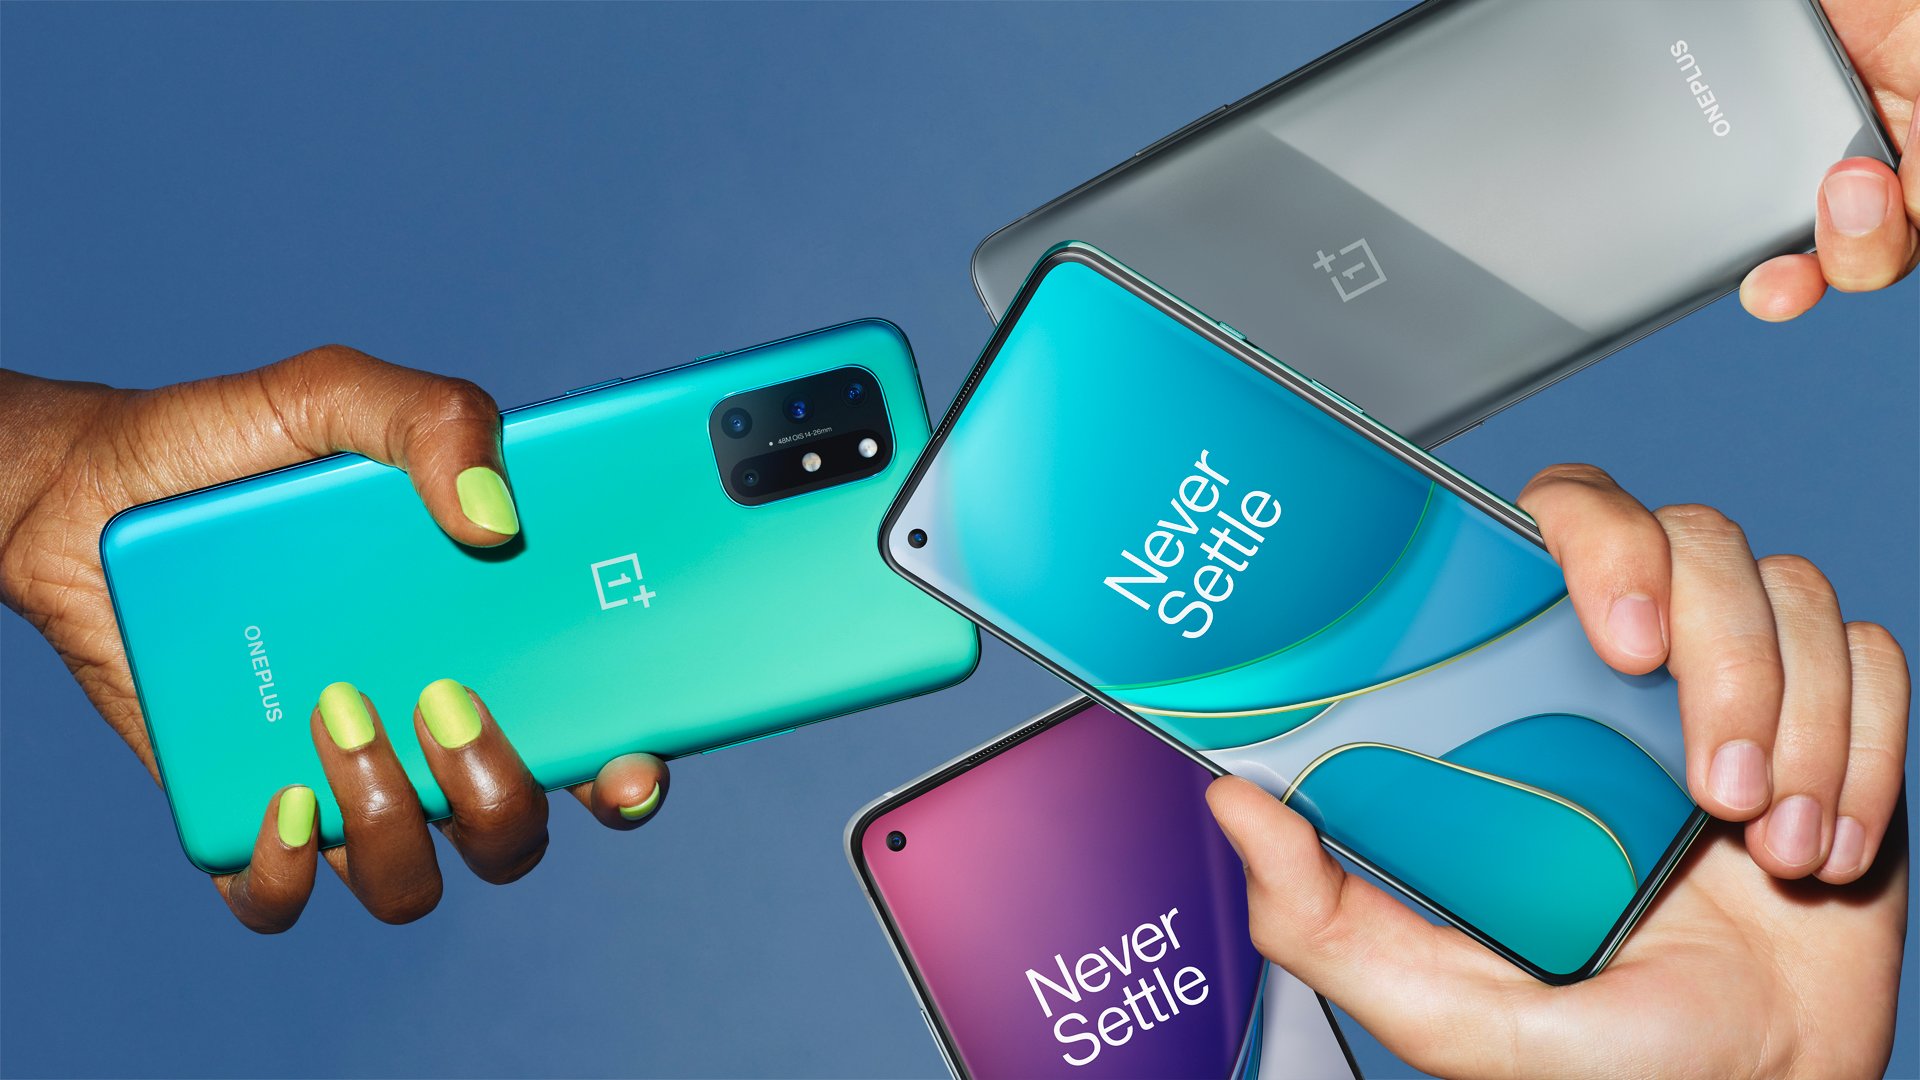 Oneplus 8t Launches In China With Cheaper Price Tag Of ¥ 3399 505